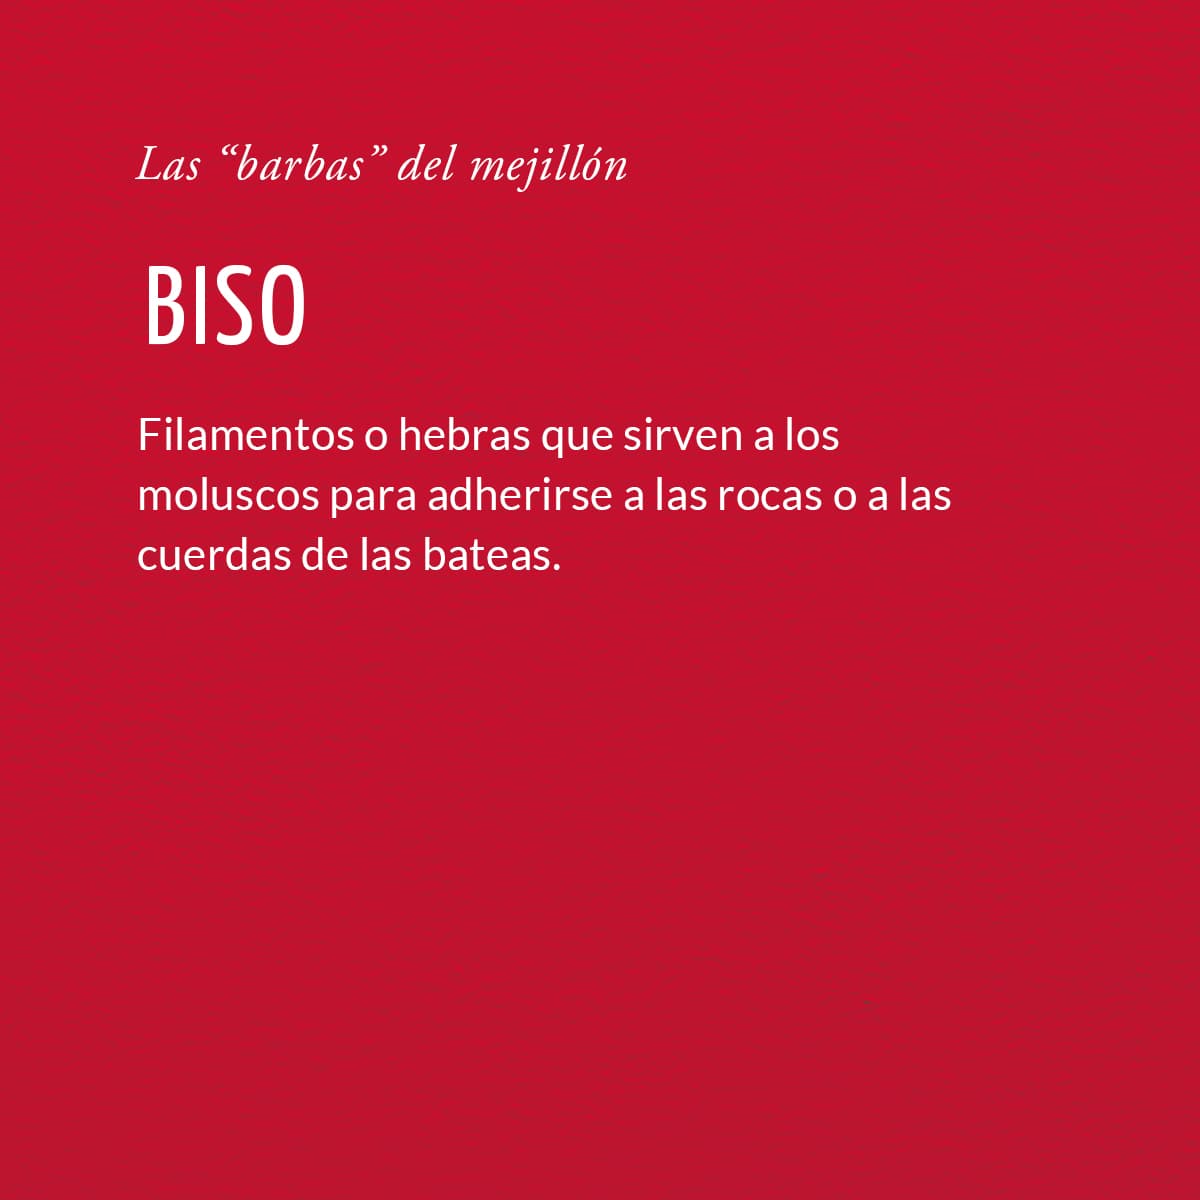 BISO